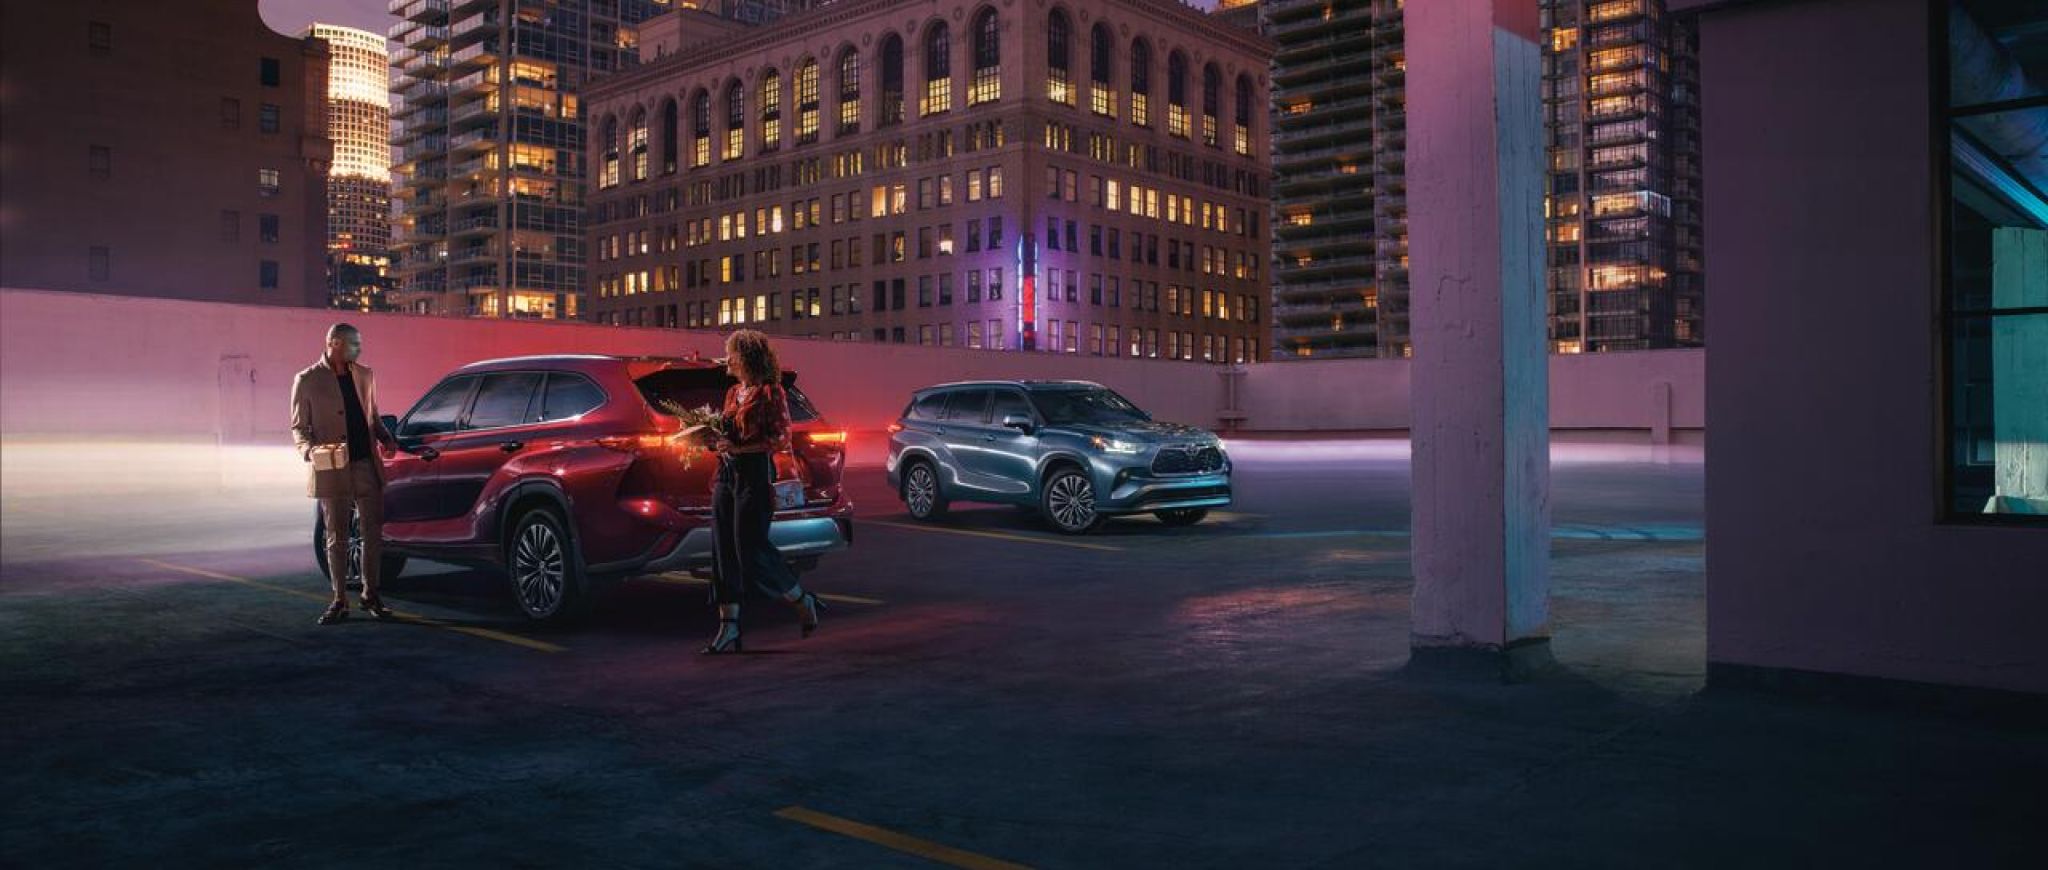 A night-time view of the sleek body lines of a Ruby Flare Pearl colored and a Stone Blue colored Toyota Highlander SUV. 